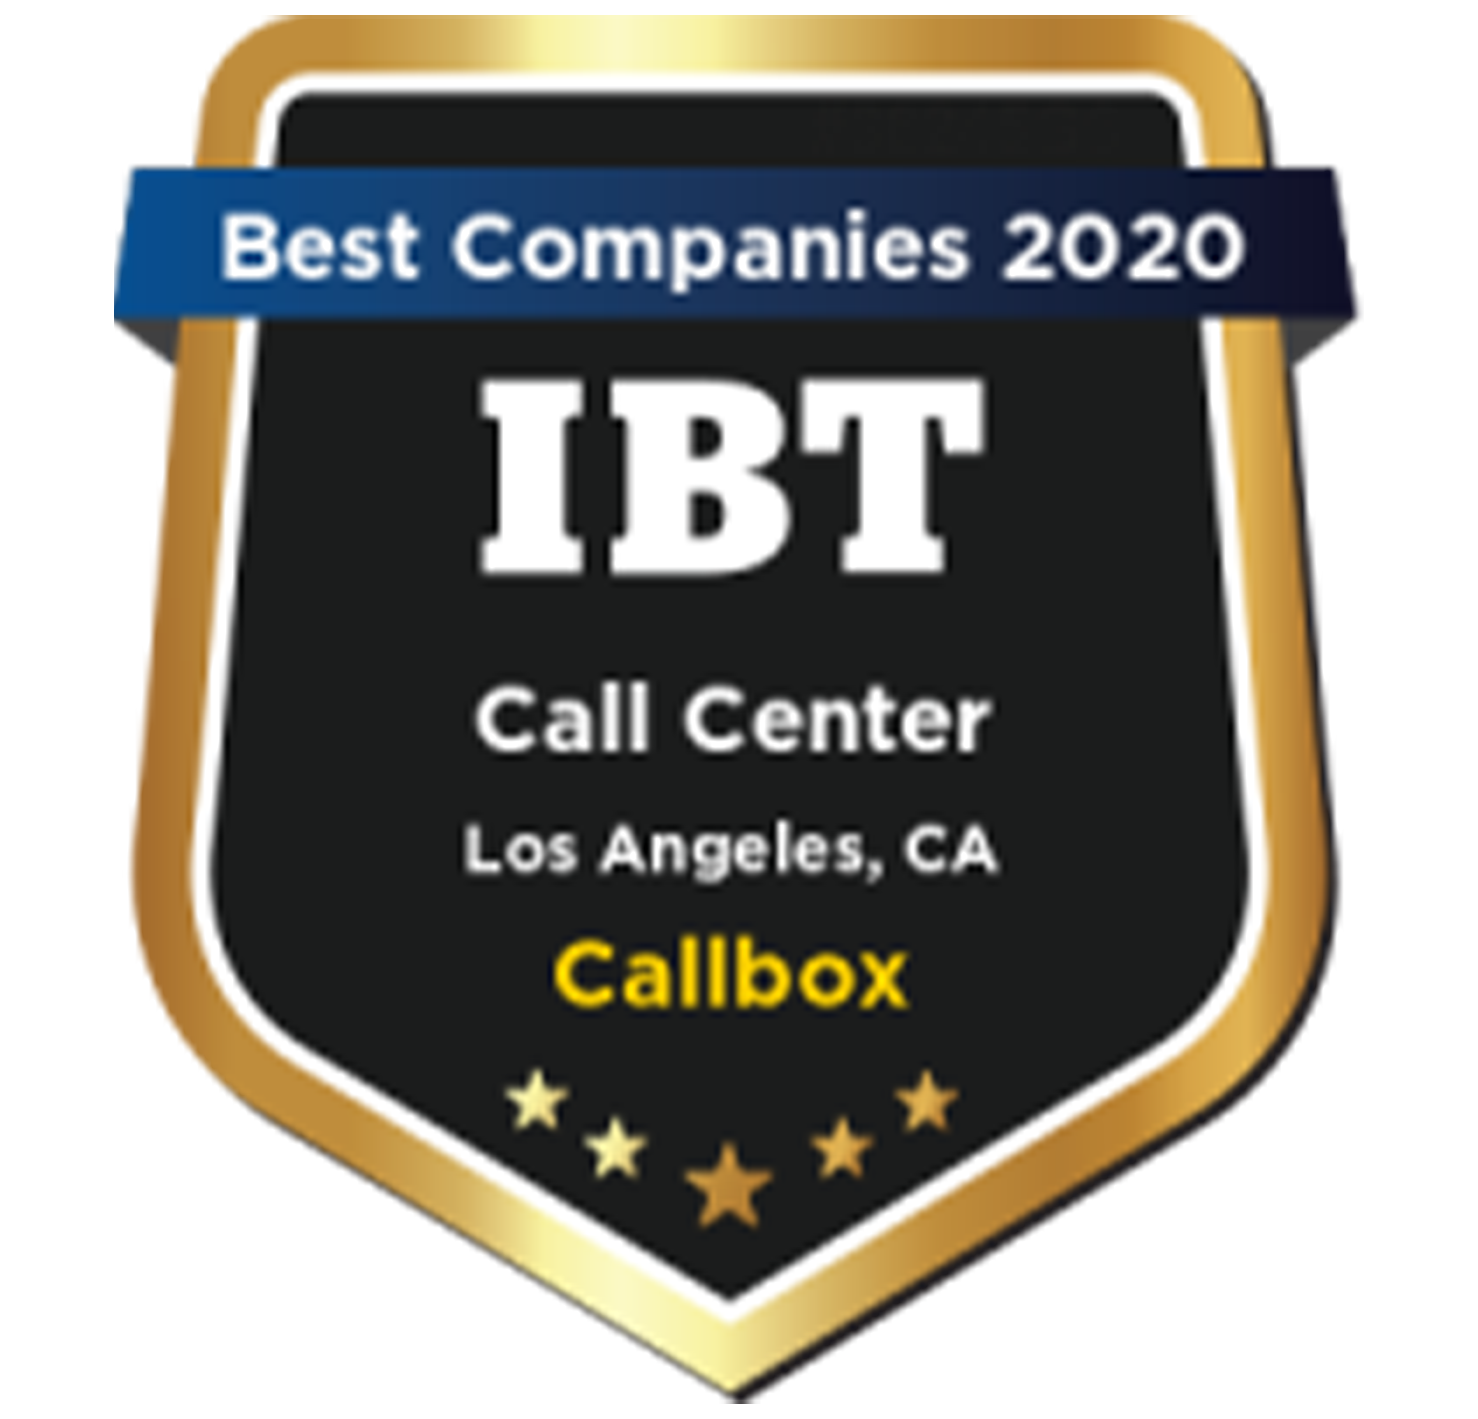 Best Call Center Company in Los Angeles, California 2020